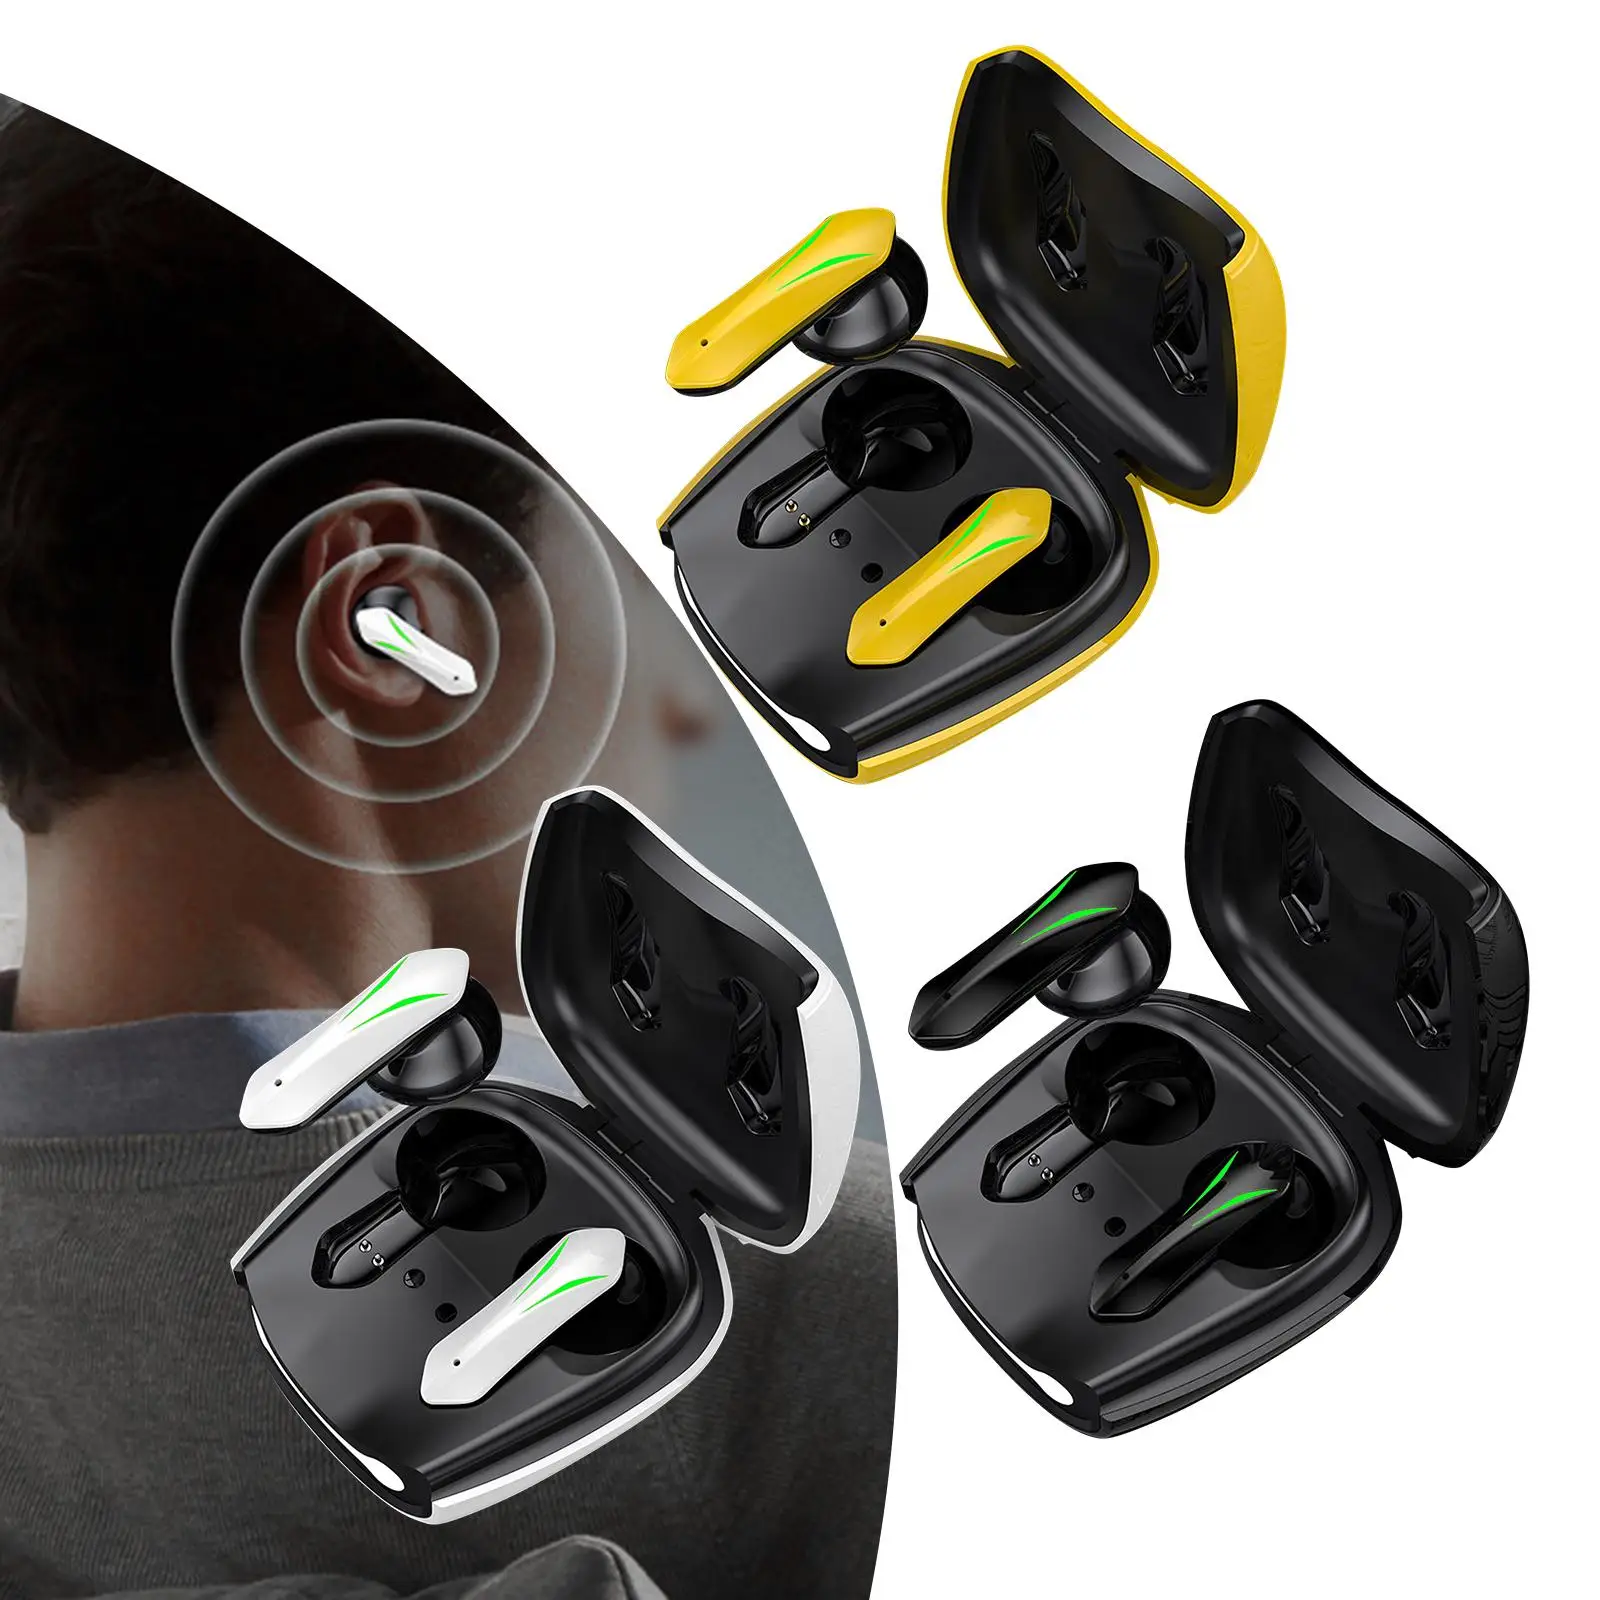 Bluetooth Headset 13mm Moving Coil in Ear for Conversation Music